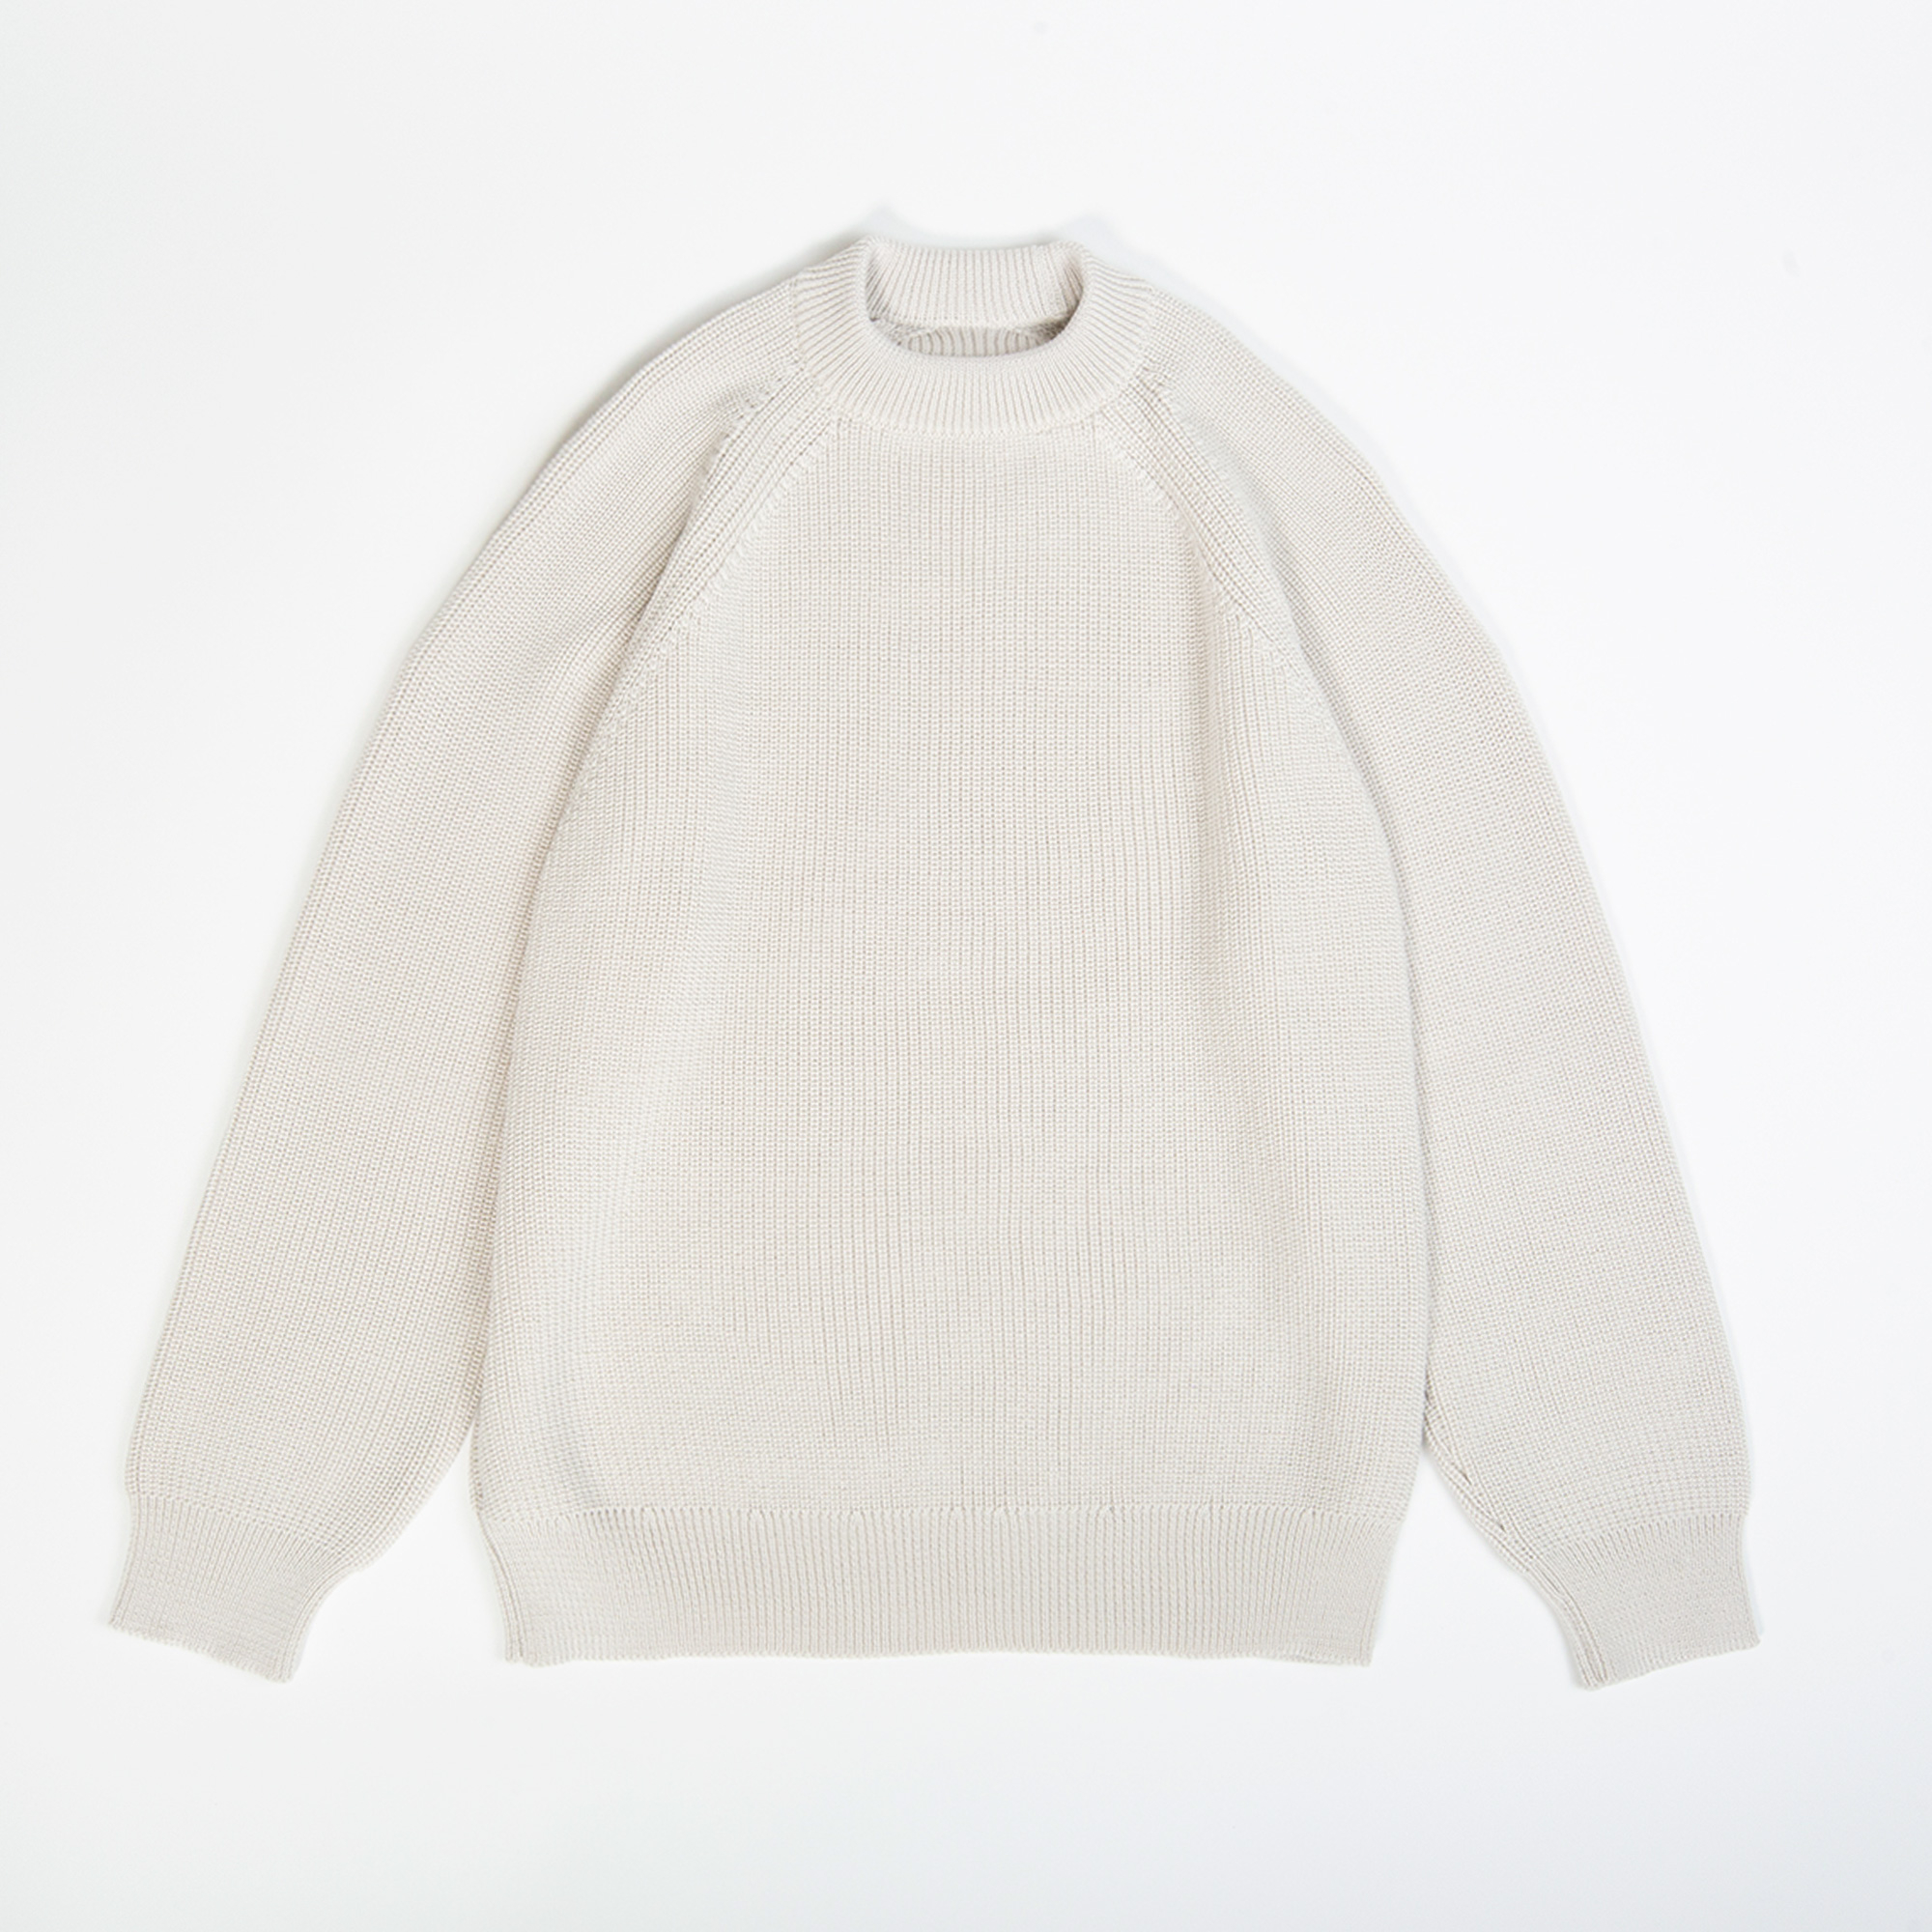 PLANO sweater in Cream color by Arpenteur